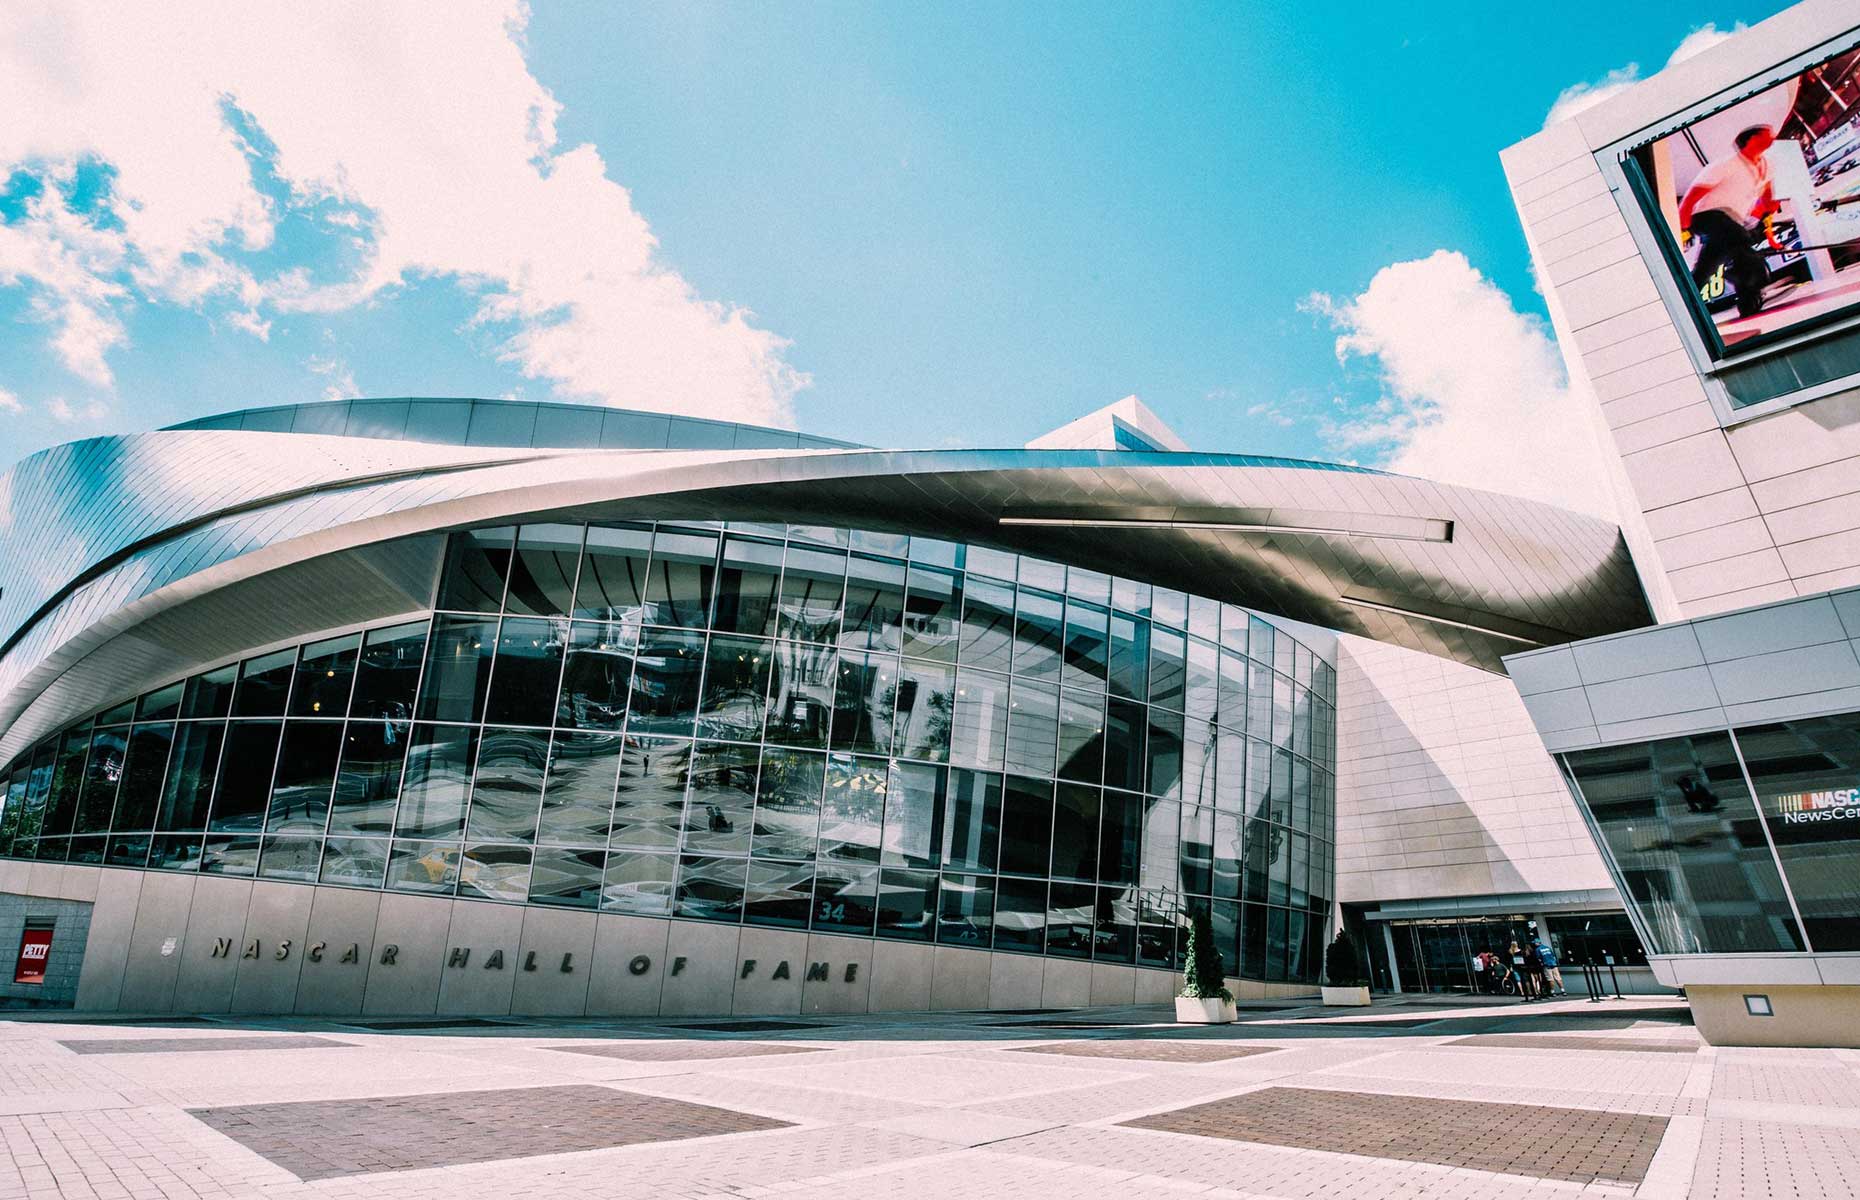 NASCAR Hall of Fame and museum in Charlotte, North Carolina (Image: nascarhall/Facebook)